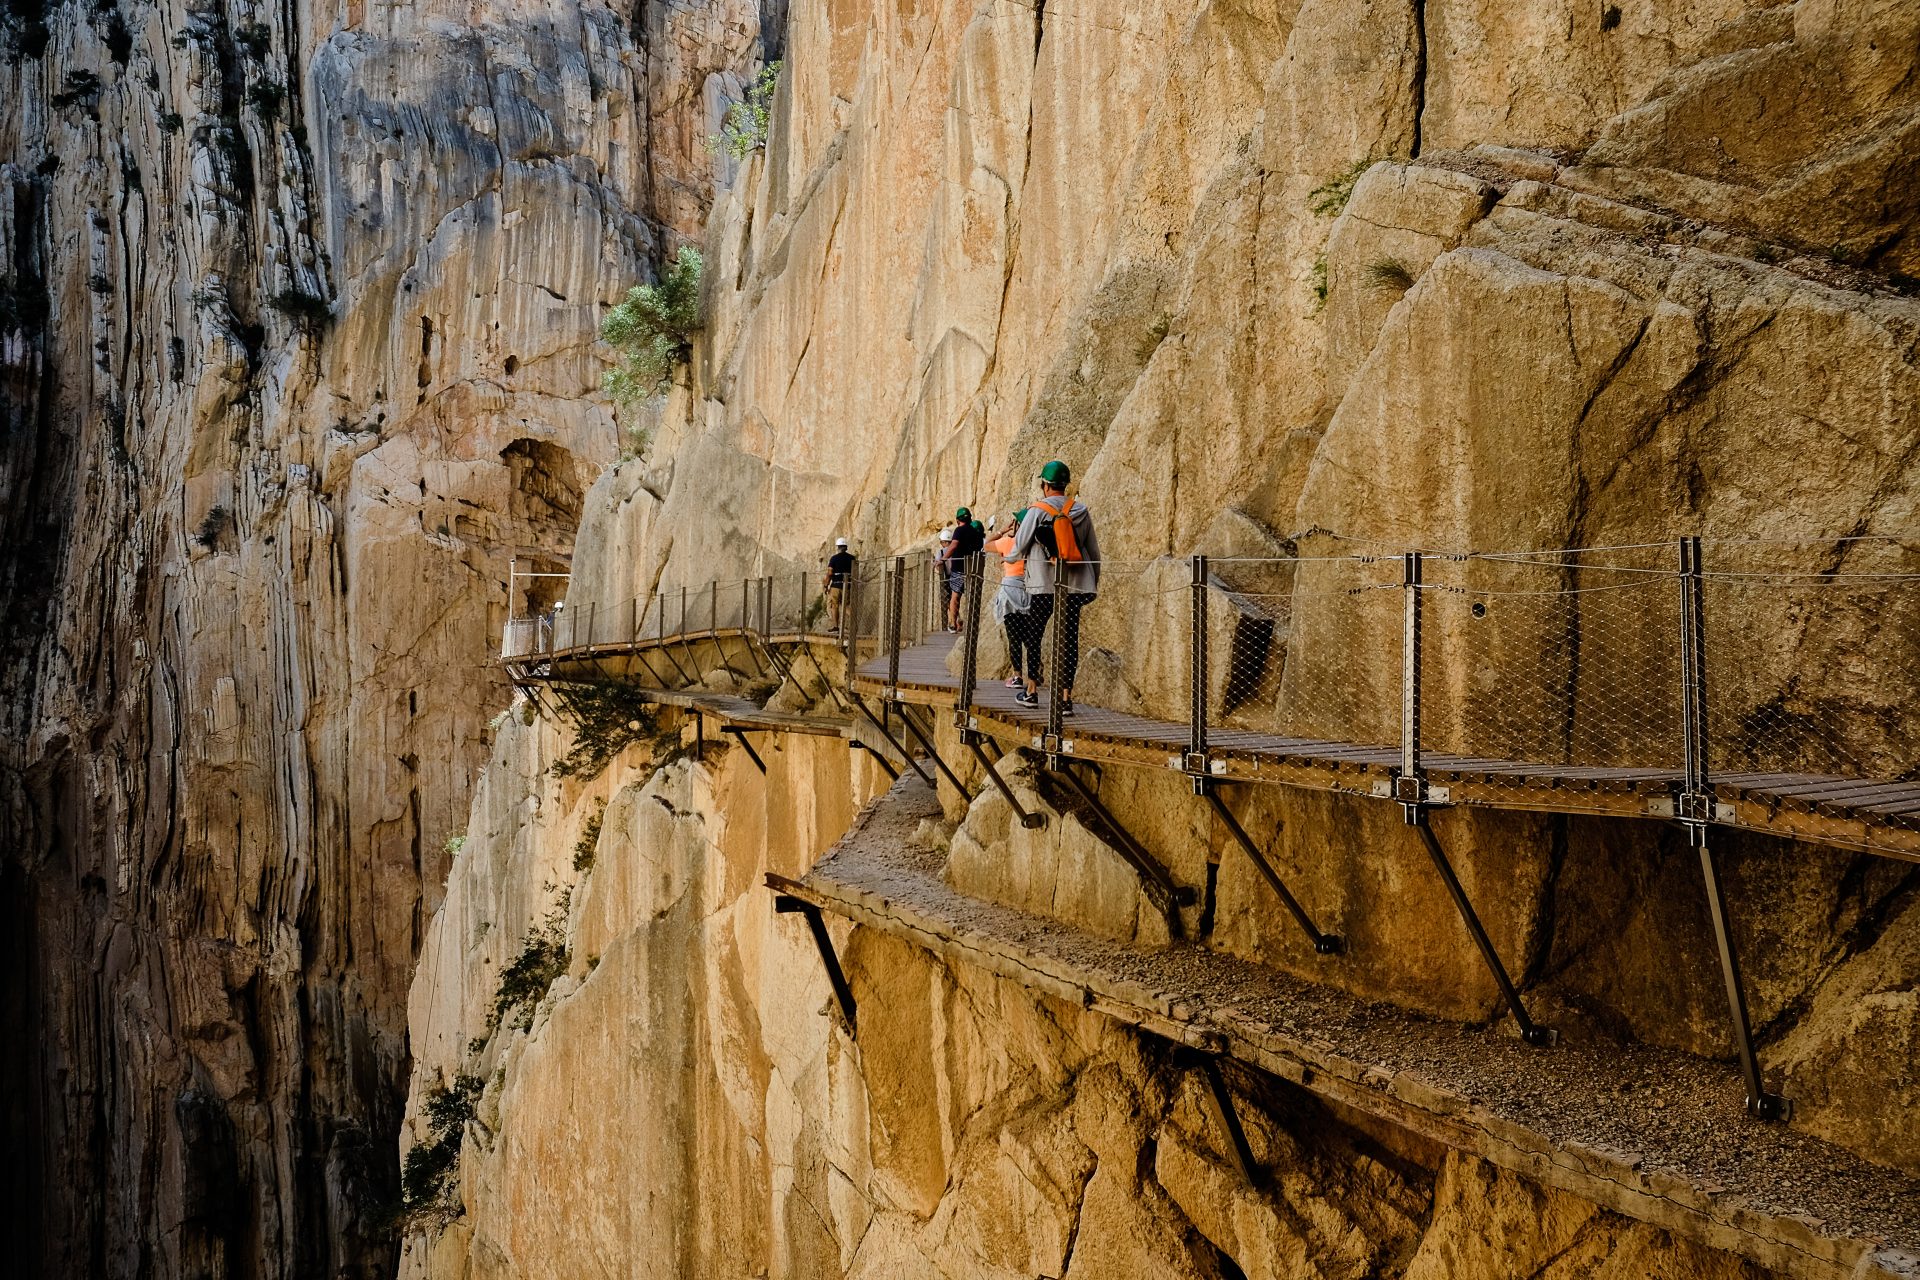 <p>Known for being one of the toughest hikes in Europe, the Caminito del Rey ('King's Little Path') has been rehabilitated with safety rails, making it less dangerous than before. This Andalusian path is located in the natural park of Los Ardales (Malaga) and offers magnificent viewpoints. If you have vertigo, however, this hike is not recommended for you, as it includes a suspension bridge at the top of the gorge, at a dizzying height, and a section with a glass floor.</p>